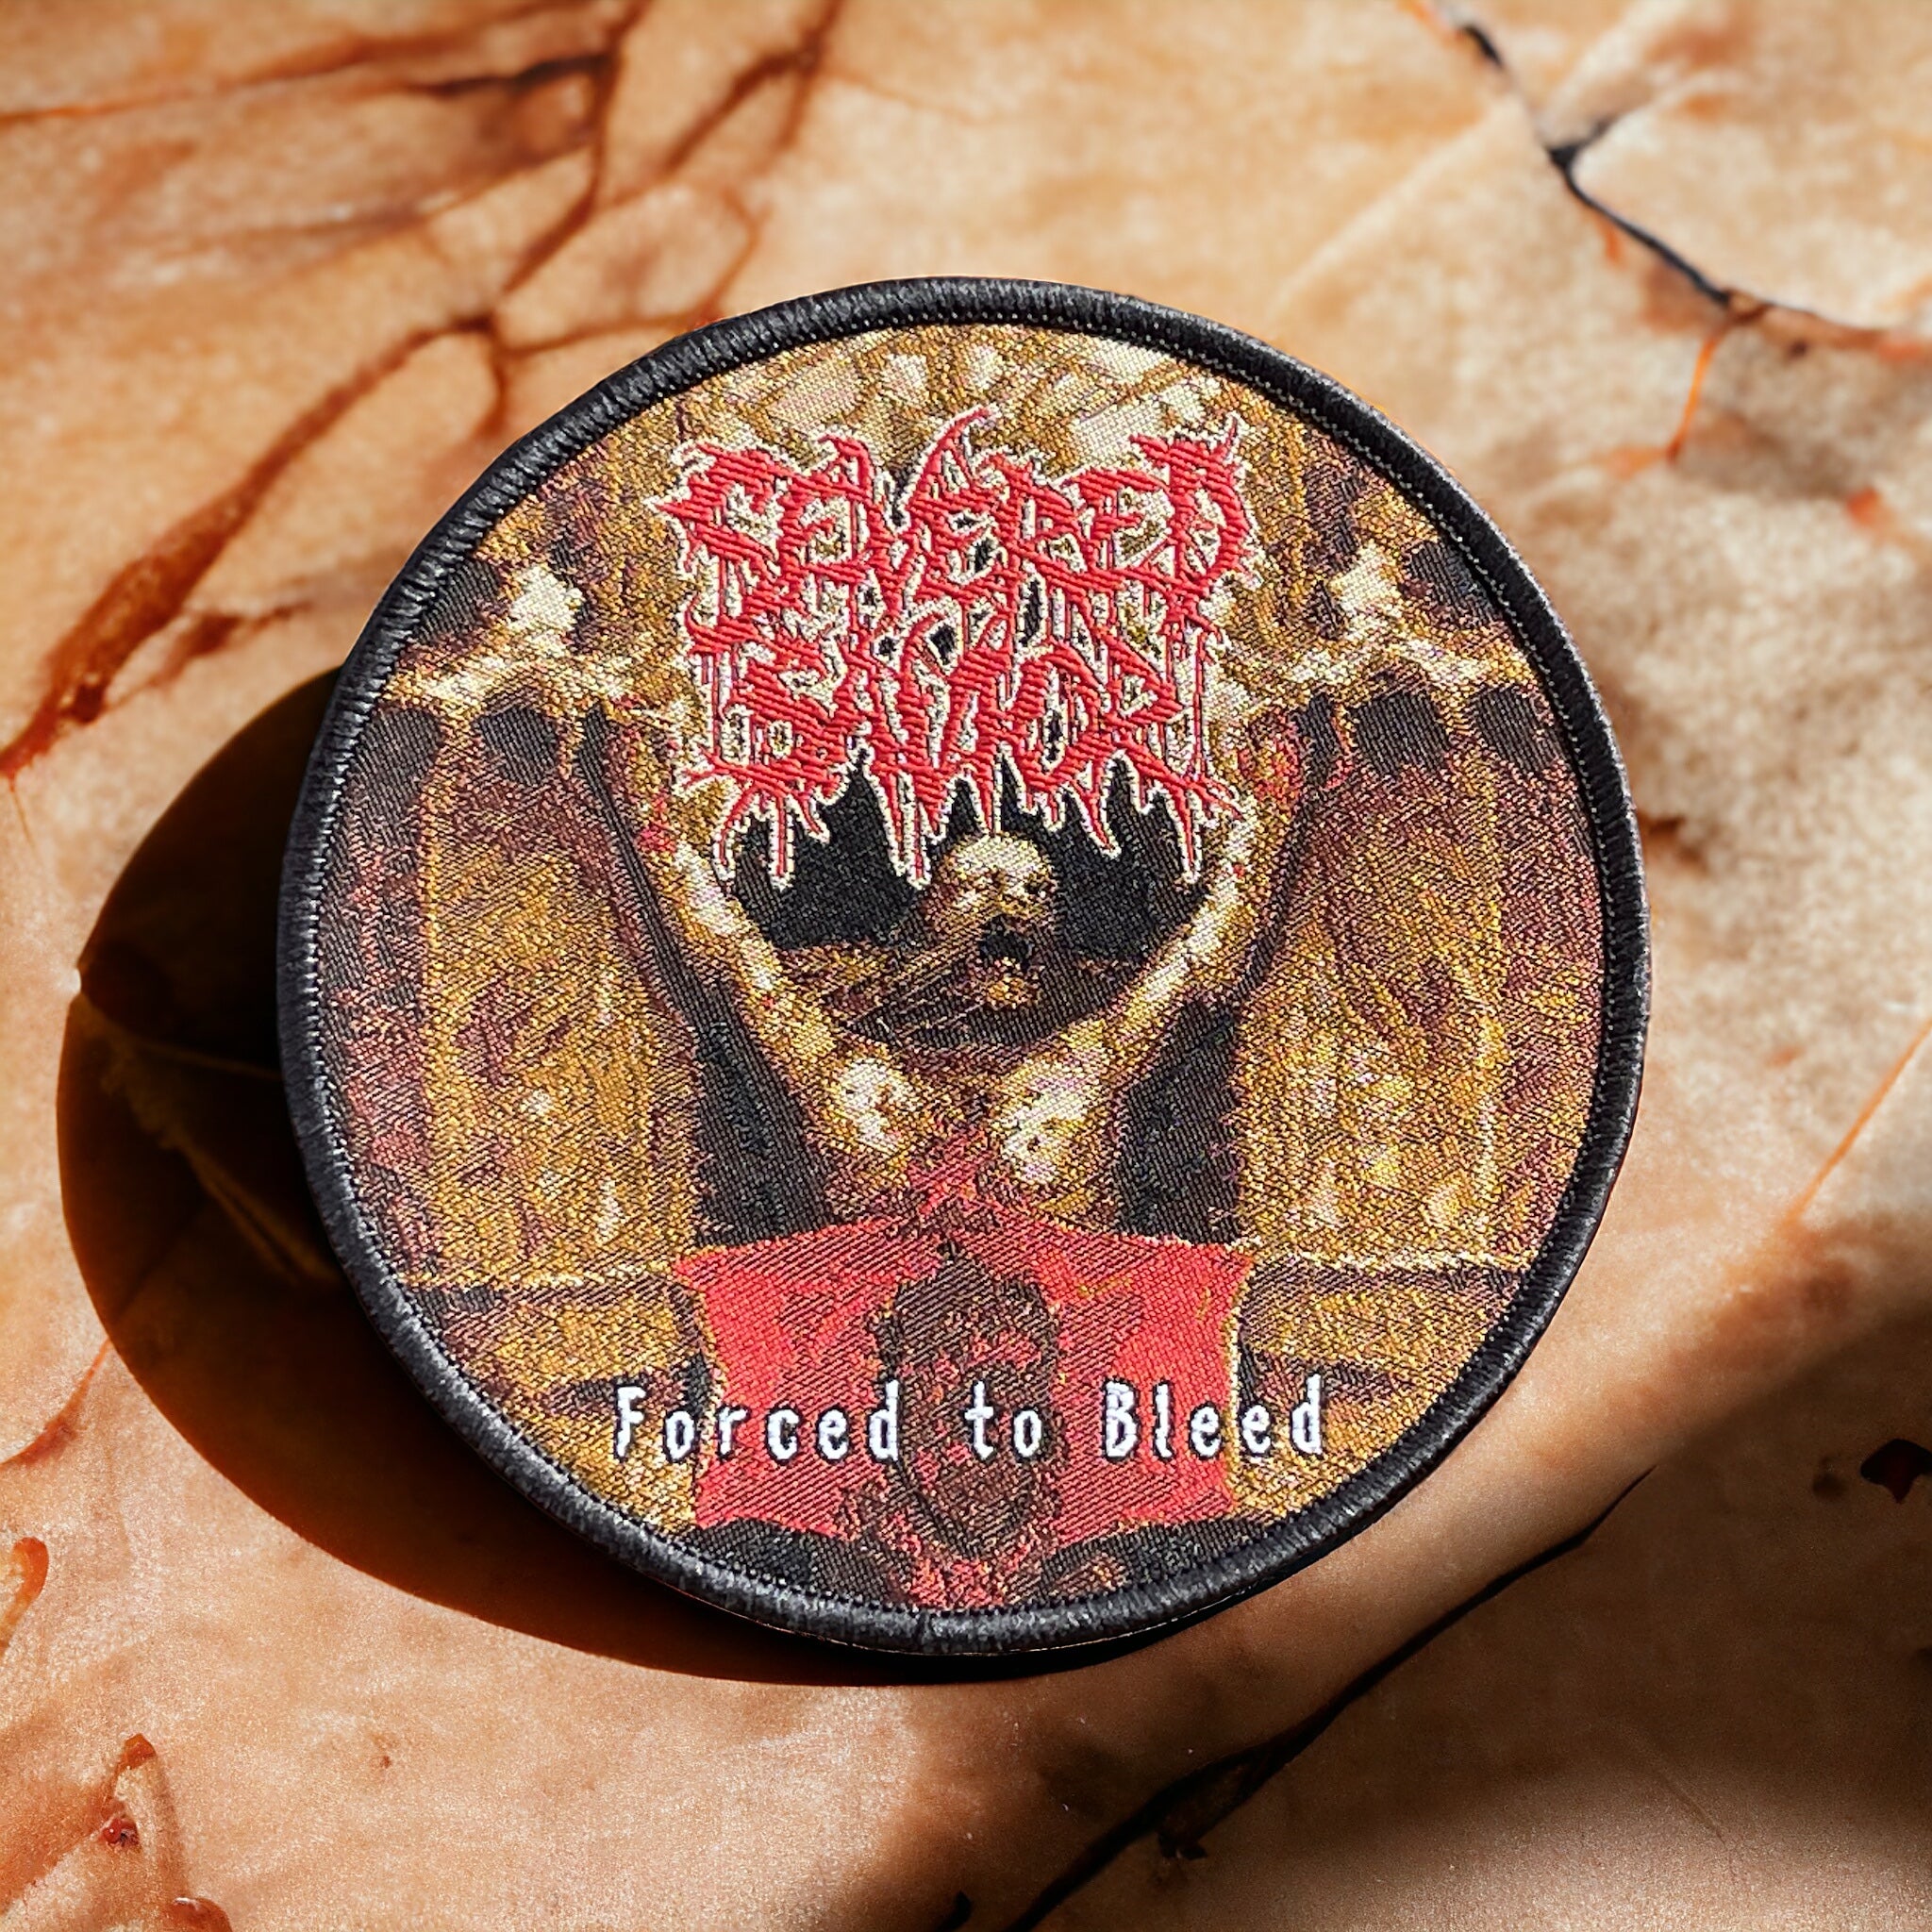 Severed Savior - Round Forced to Bleed Patch - Black Border